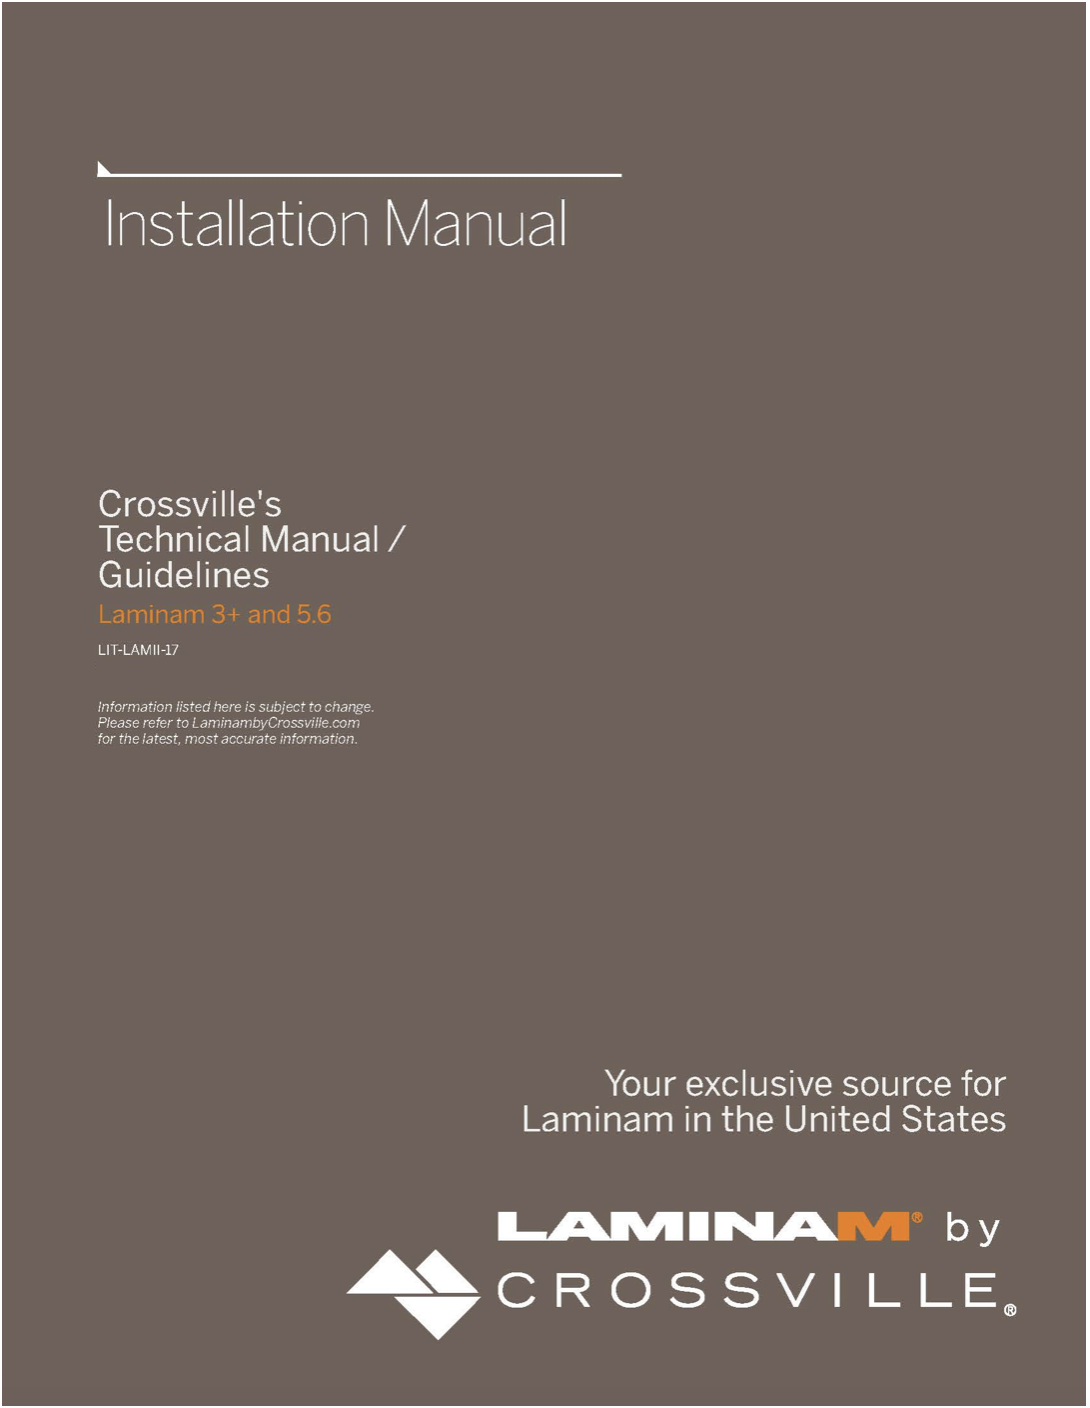 Installation Manual Cover Crossville GPTP